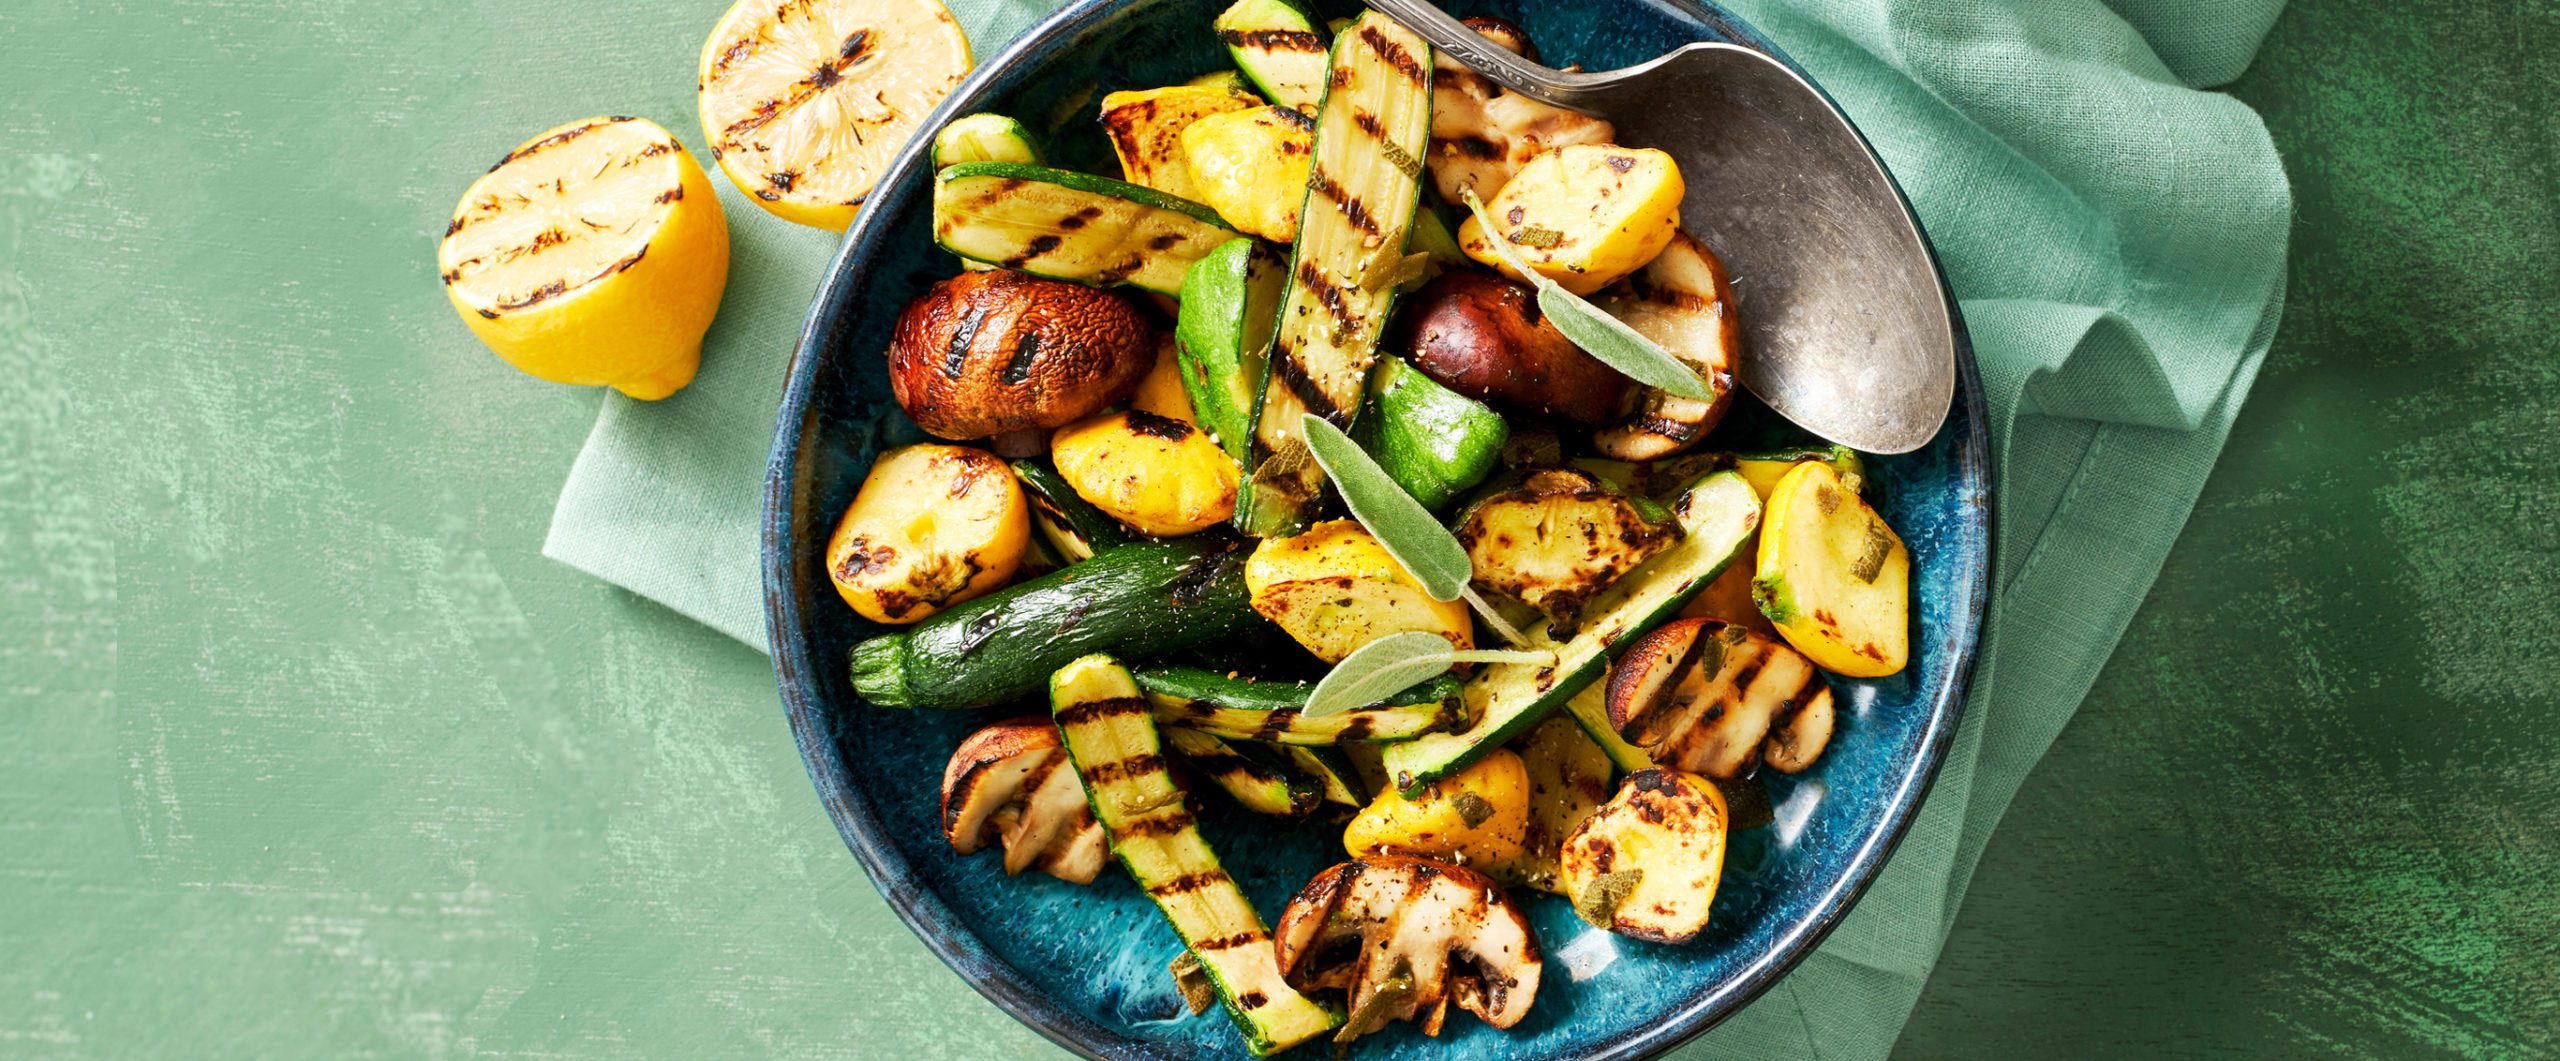 Herb-Grilled Baby Squash and Mushrooms